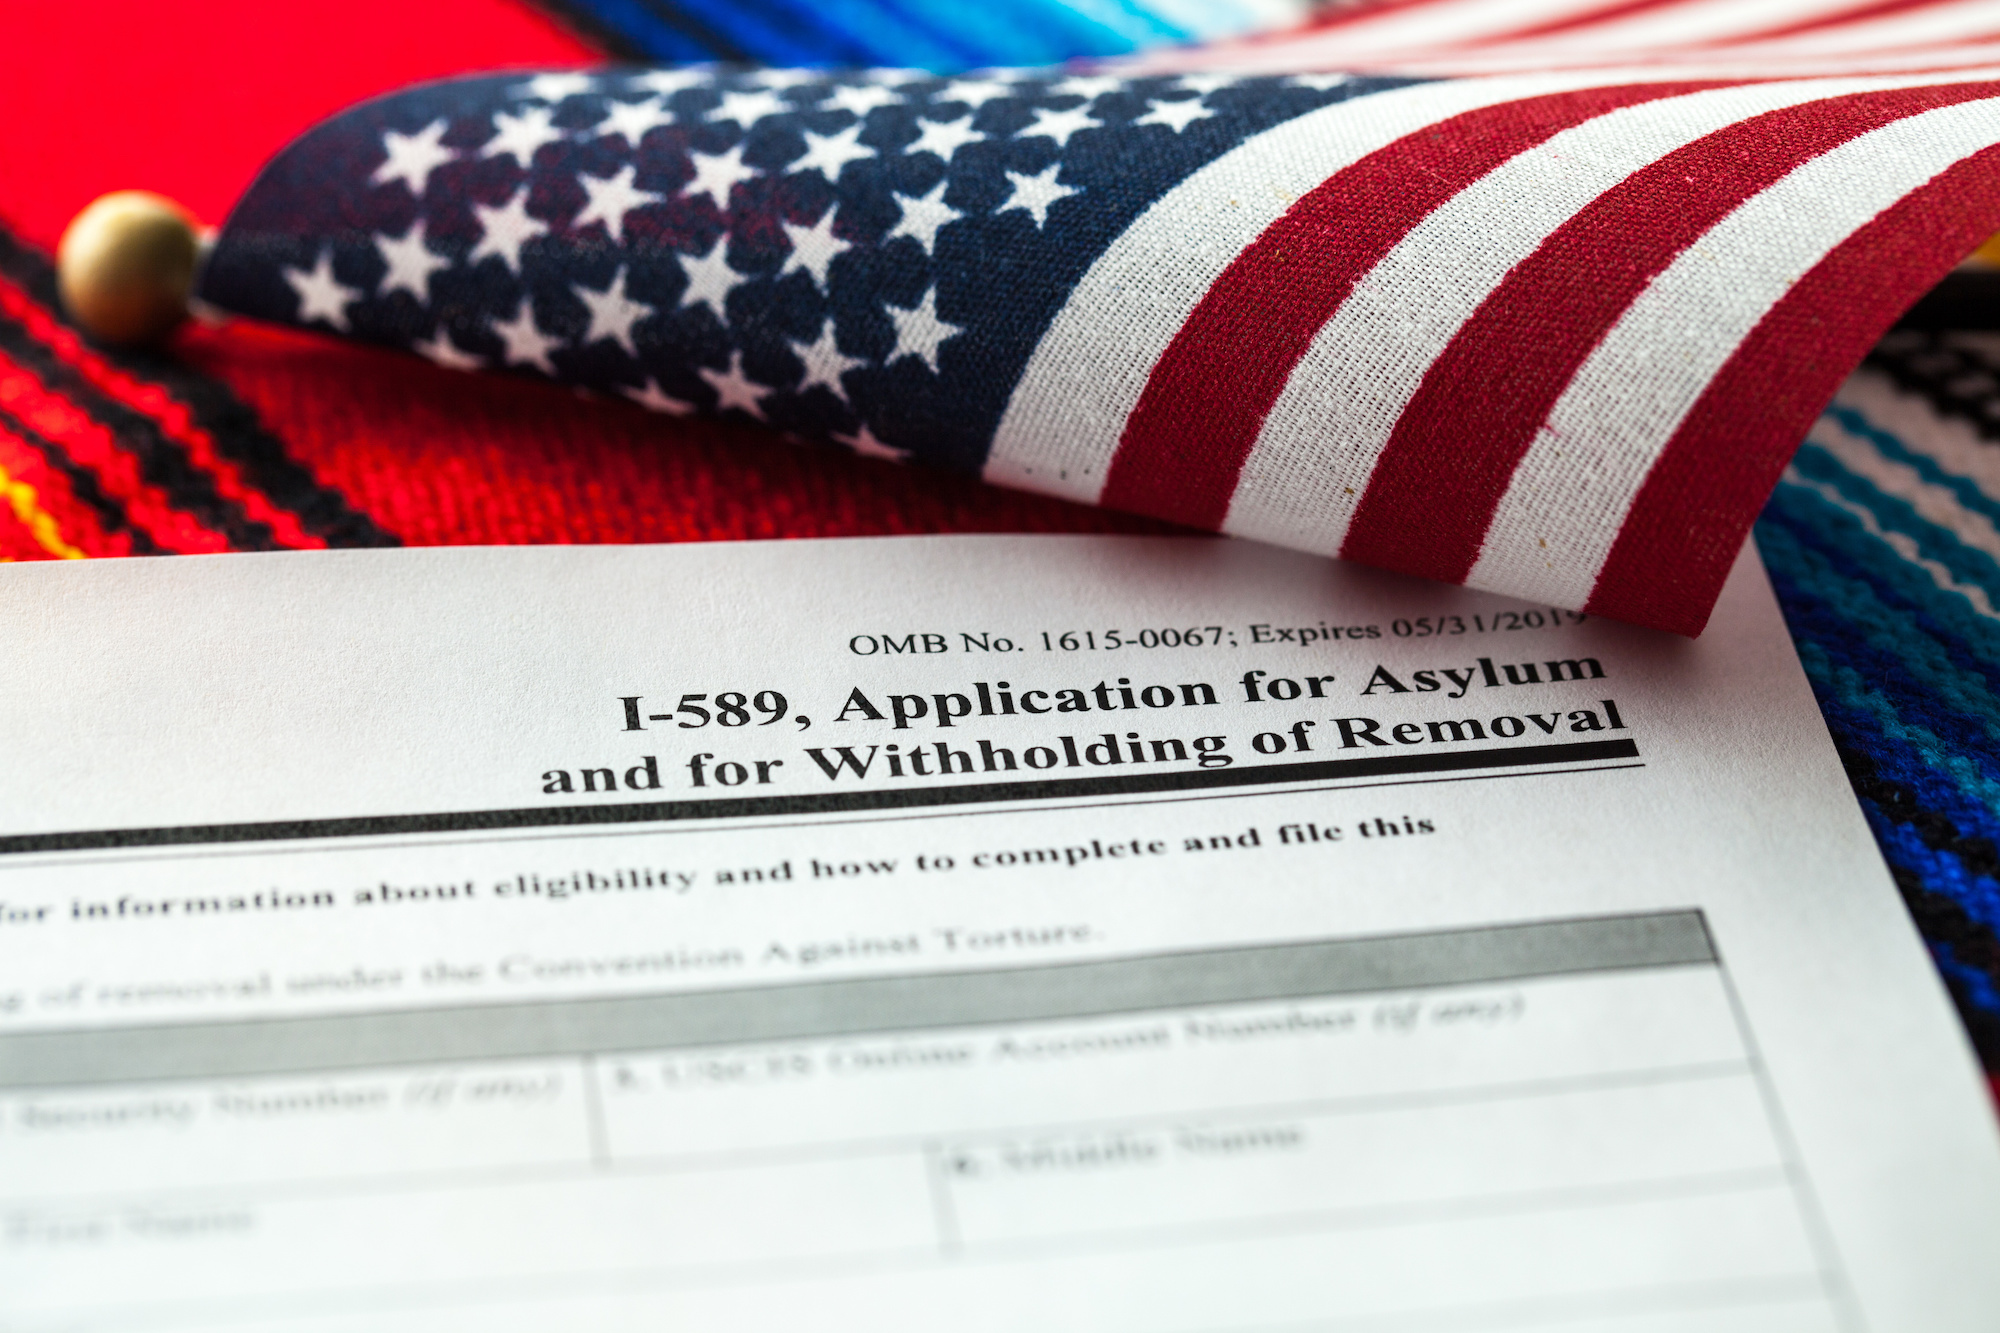 An Asylum application from the USICS next to a small American flag and over a sarape.